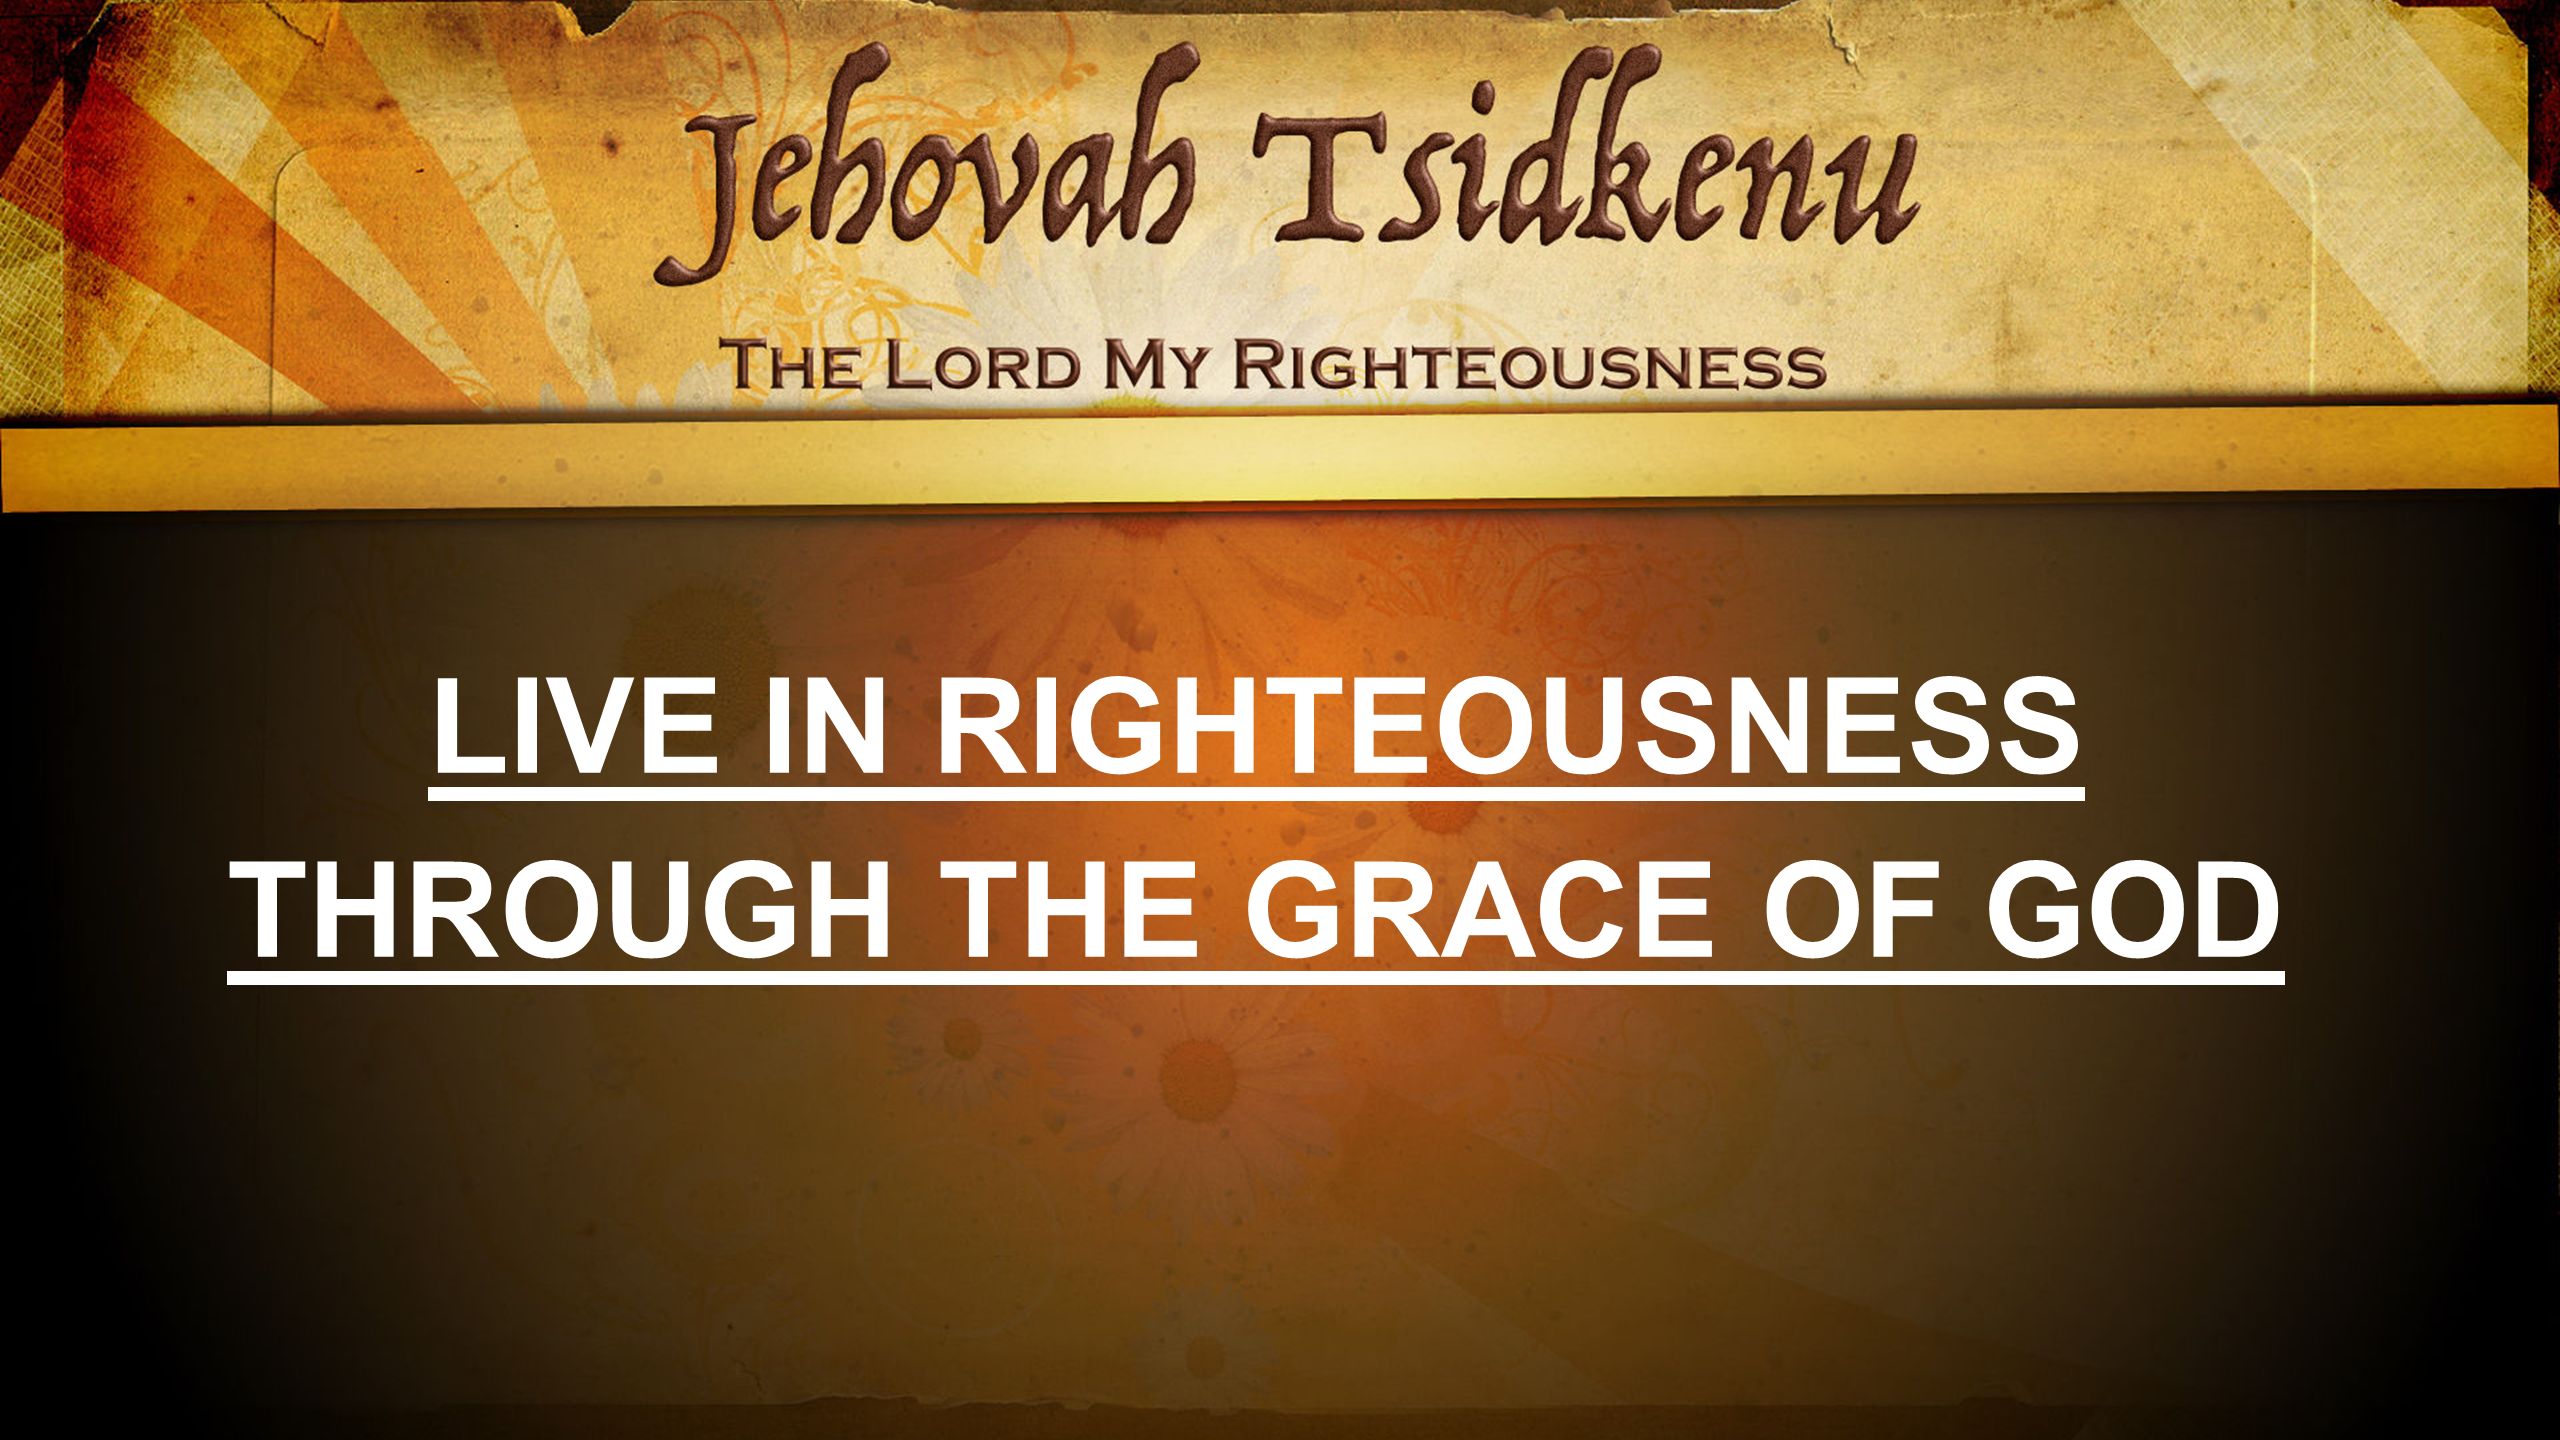 LIVE IN RIGHTEOUSNESS THROUGH THE GRACE OF GOD